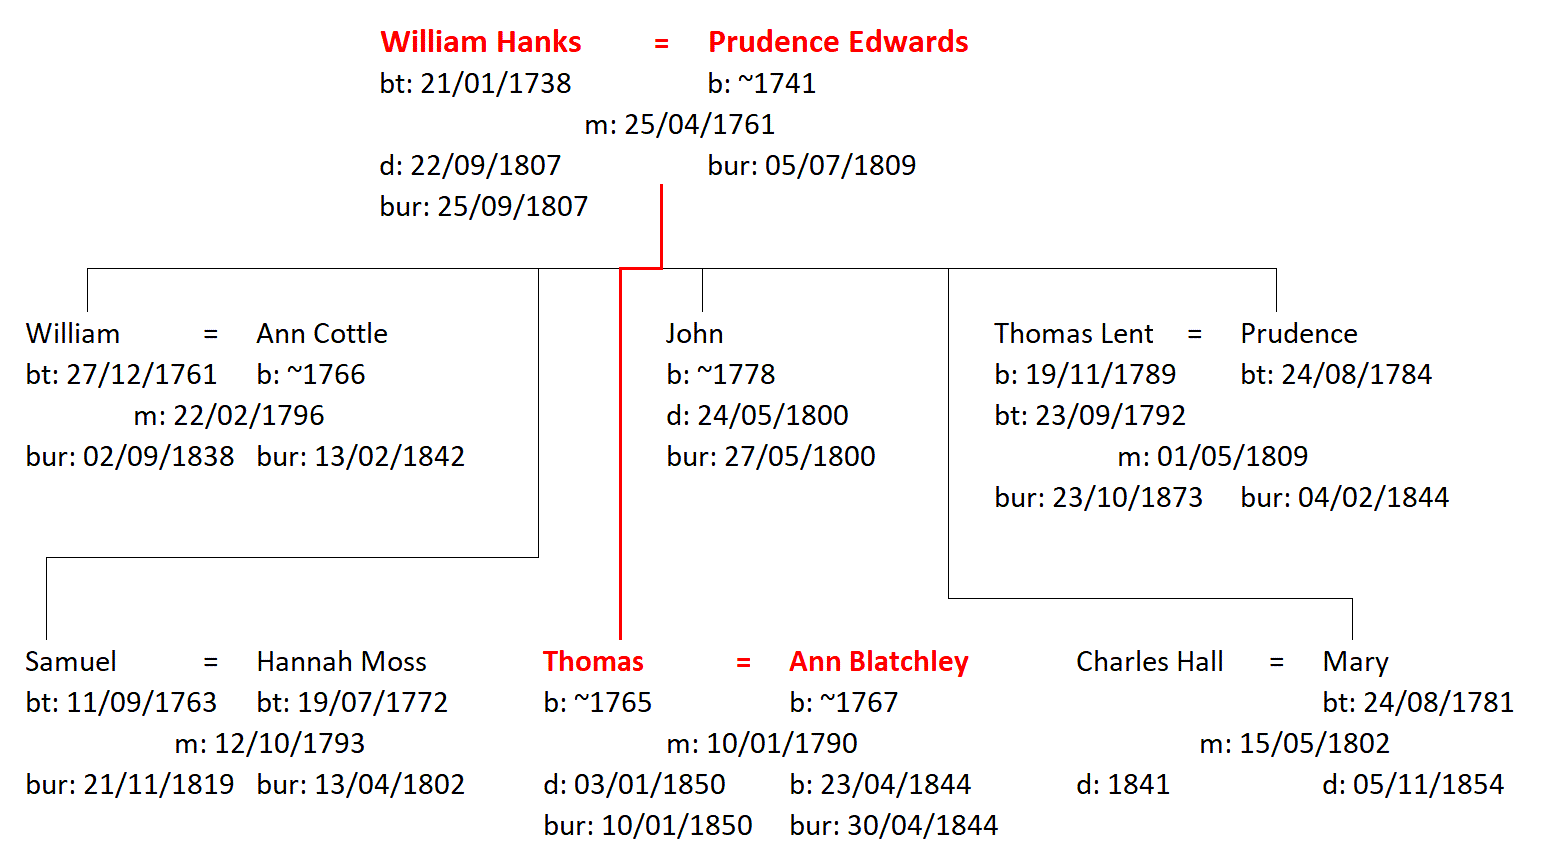 Figure 3: The Family of William and Prudence Hanks